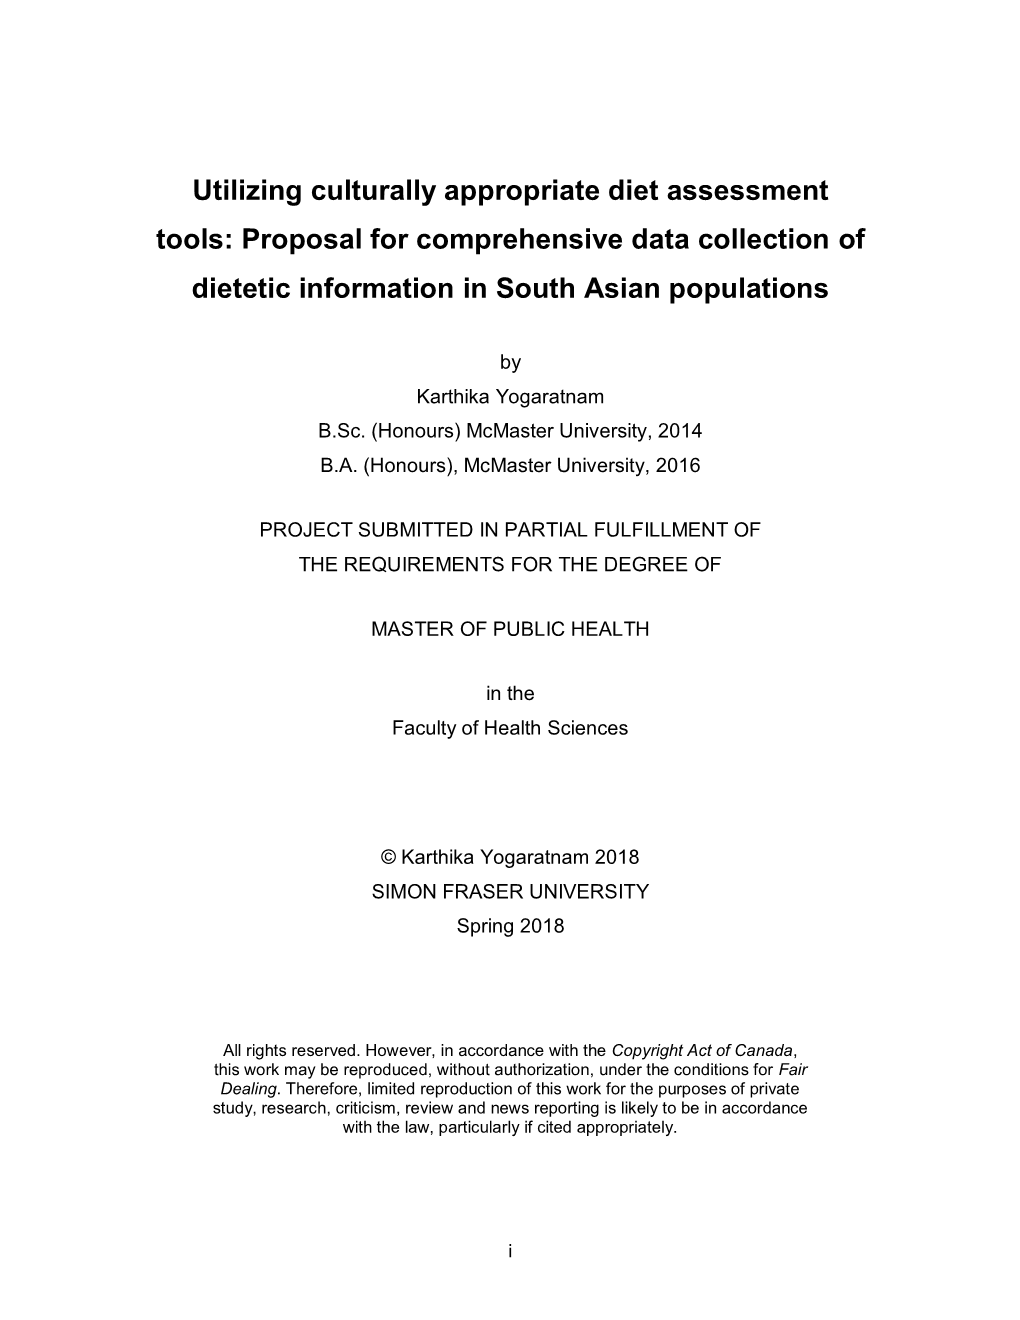 Utilizing Culturally Appropriate Diet Assessment Tools: Proposal for Comprehensive Data Collection of Dietetic Information in South Asian Populations